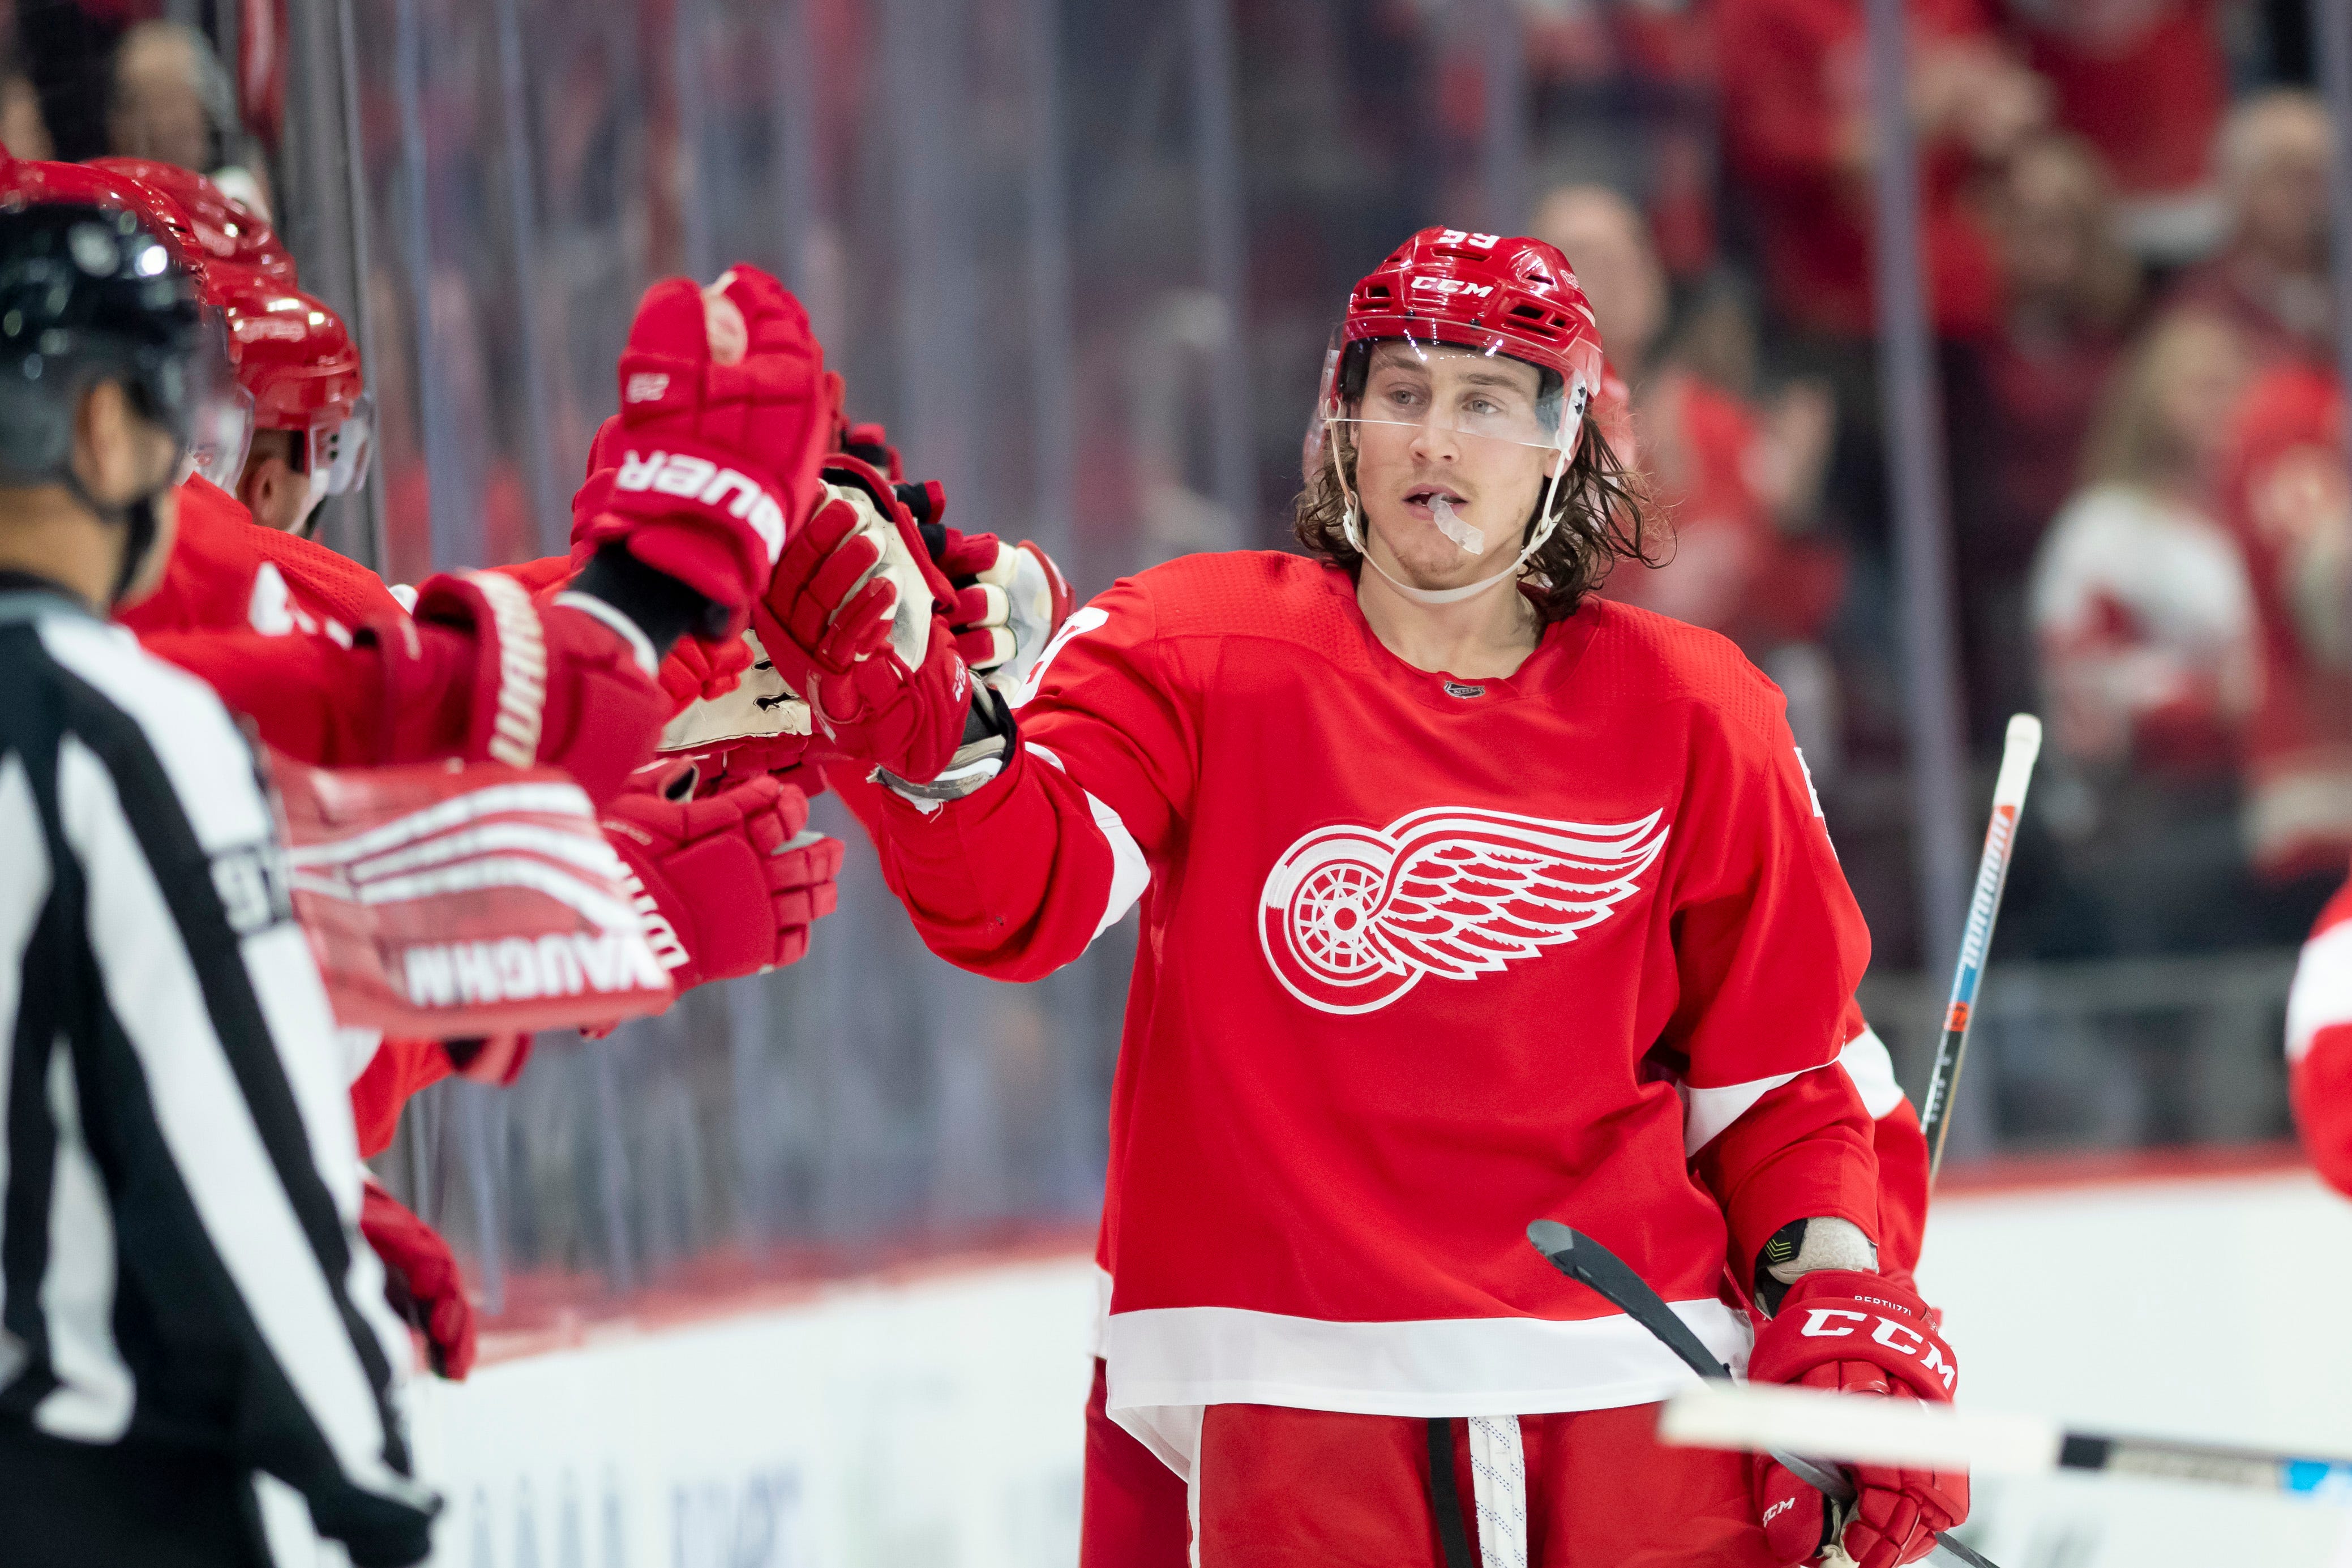 Tyler Bertuzzi – AGE: 25. CONTRACT: Restricted free agent. STATS:  71 games, 21 goals, 27 assists. COMMENT: Bertuzzi was the Wings’ lone All-Star representative, and it was deserved. He can play an important complementary role on any line, does all the dirty work, and never complains. A key piece going forward. GRADE: B-plus.